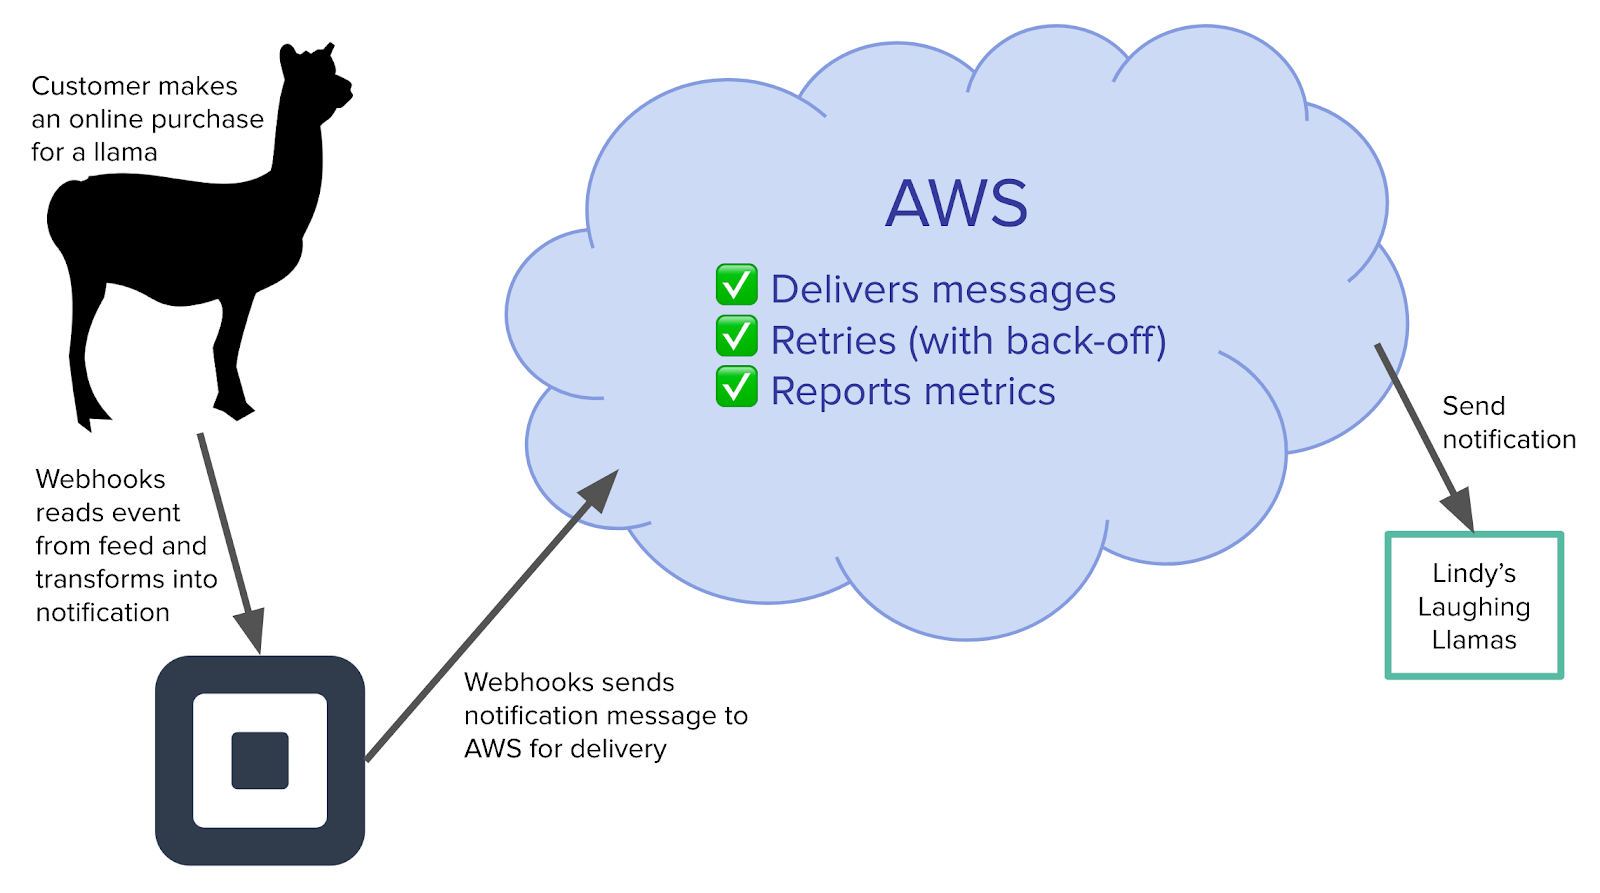 Using AWS allows Webhooks to decouple event reading and notification delivery.